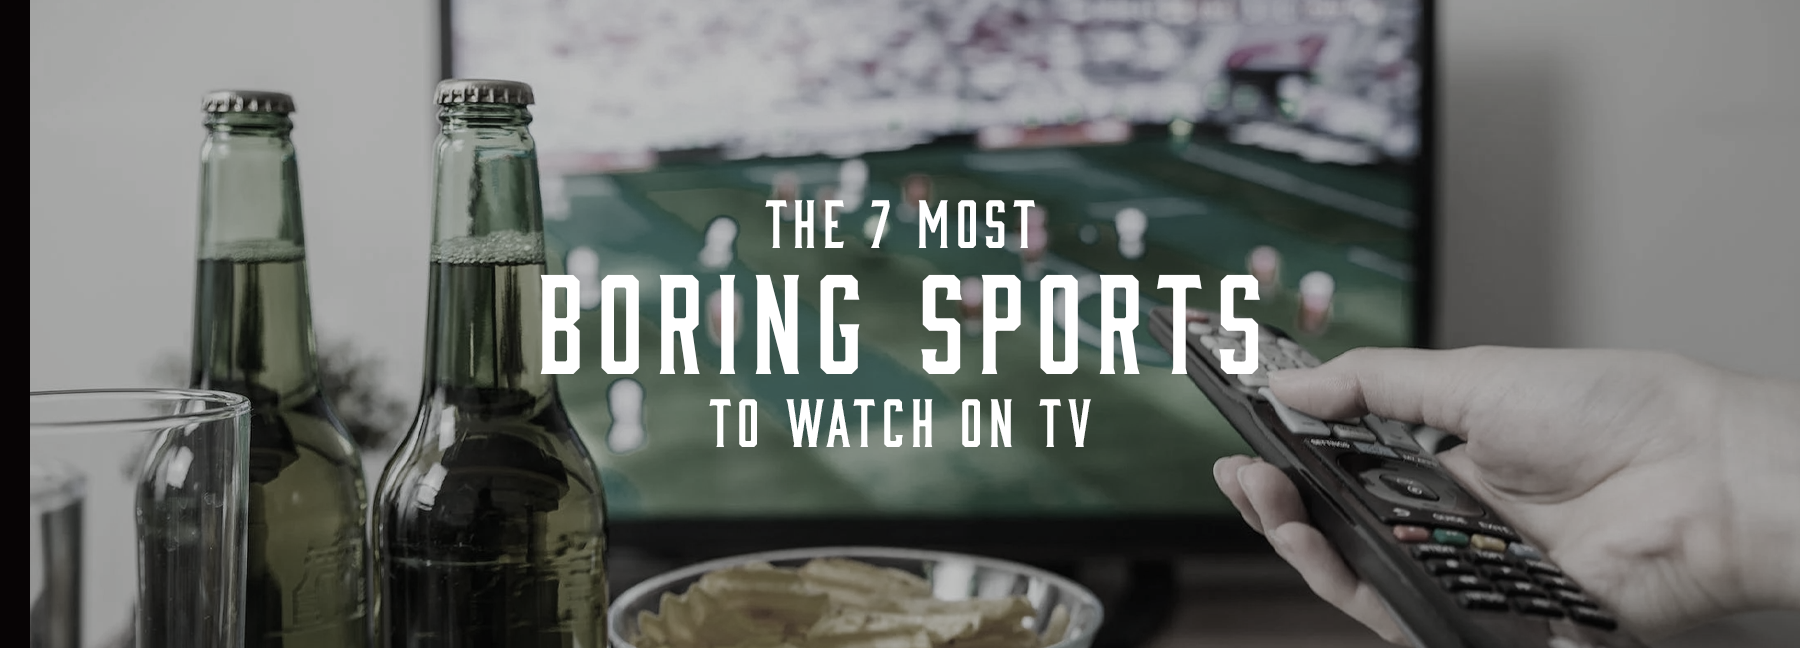 7 Most Boring Sports To Watch On TV That Are Fun To Play